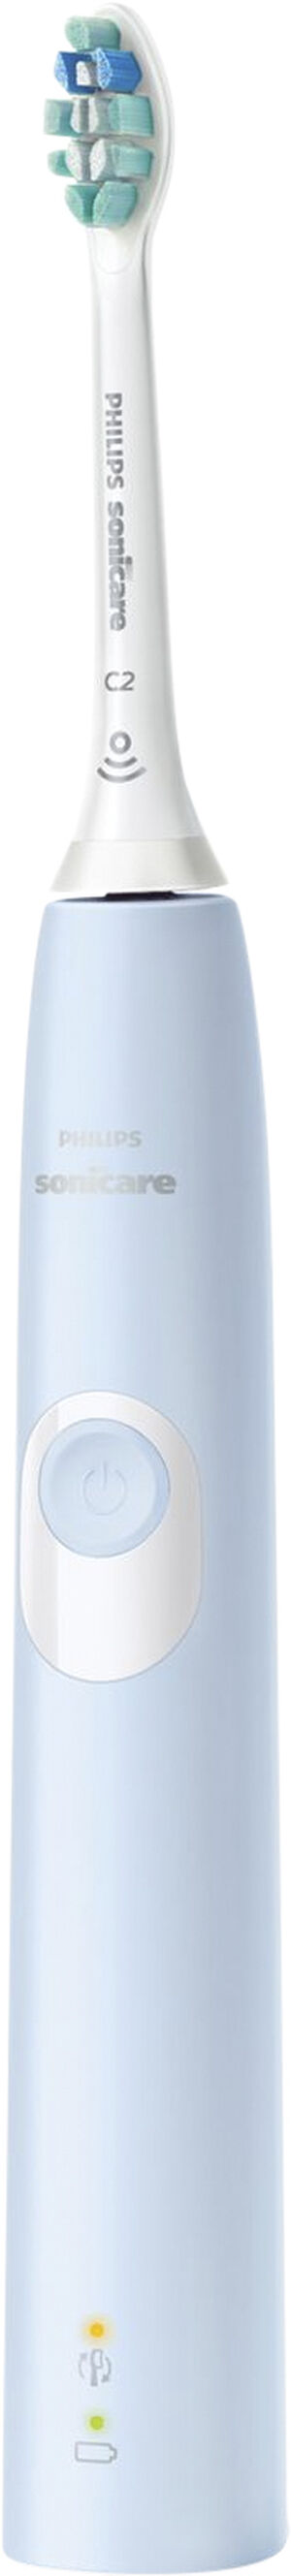 Sonicare, Protective clean, bl